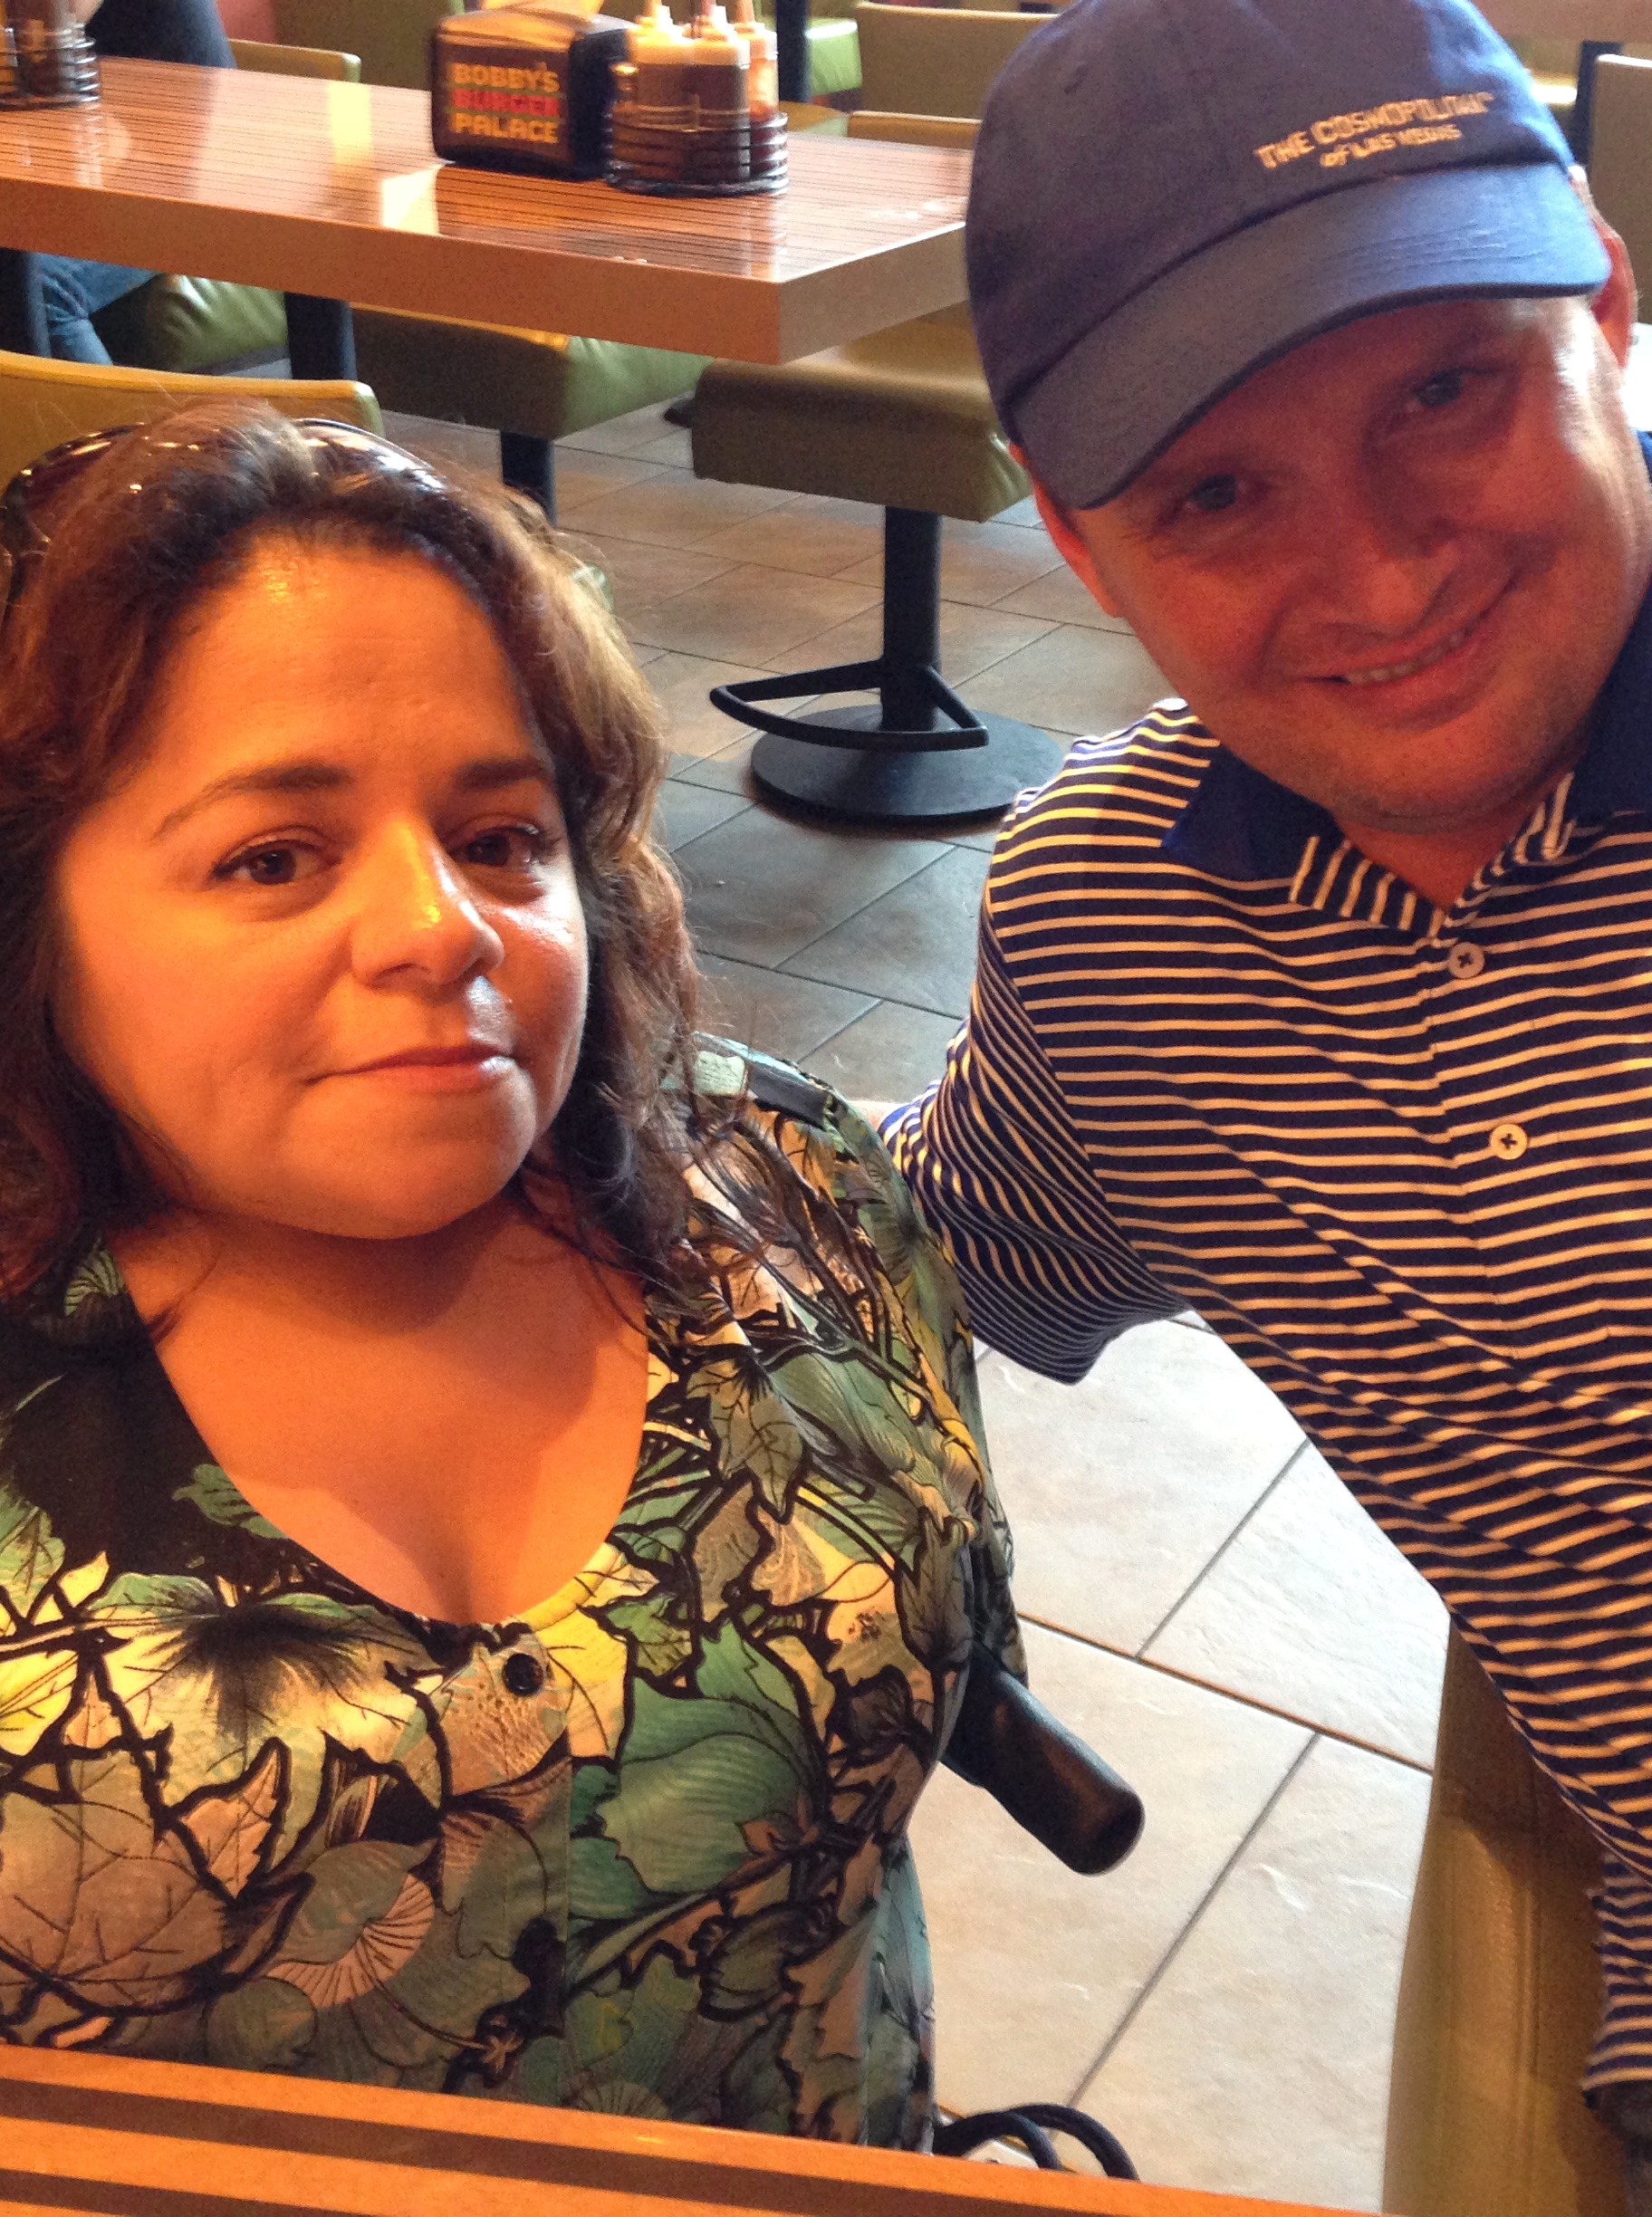 Nathasha and Bob Mundell, the Director of Operations for Bobby Flay's Bobby's Burger Palace.